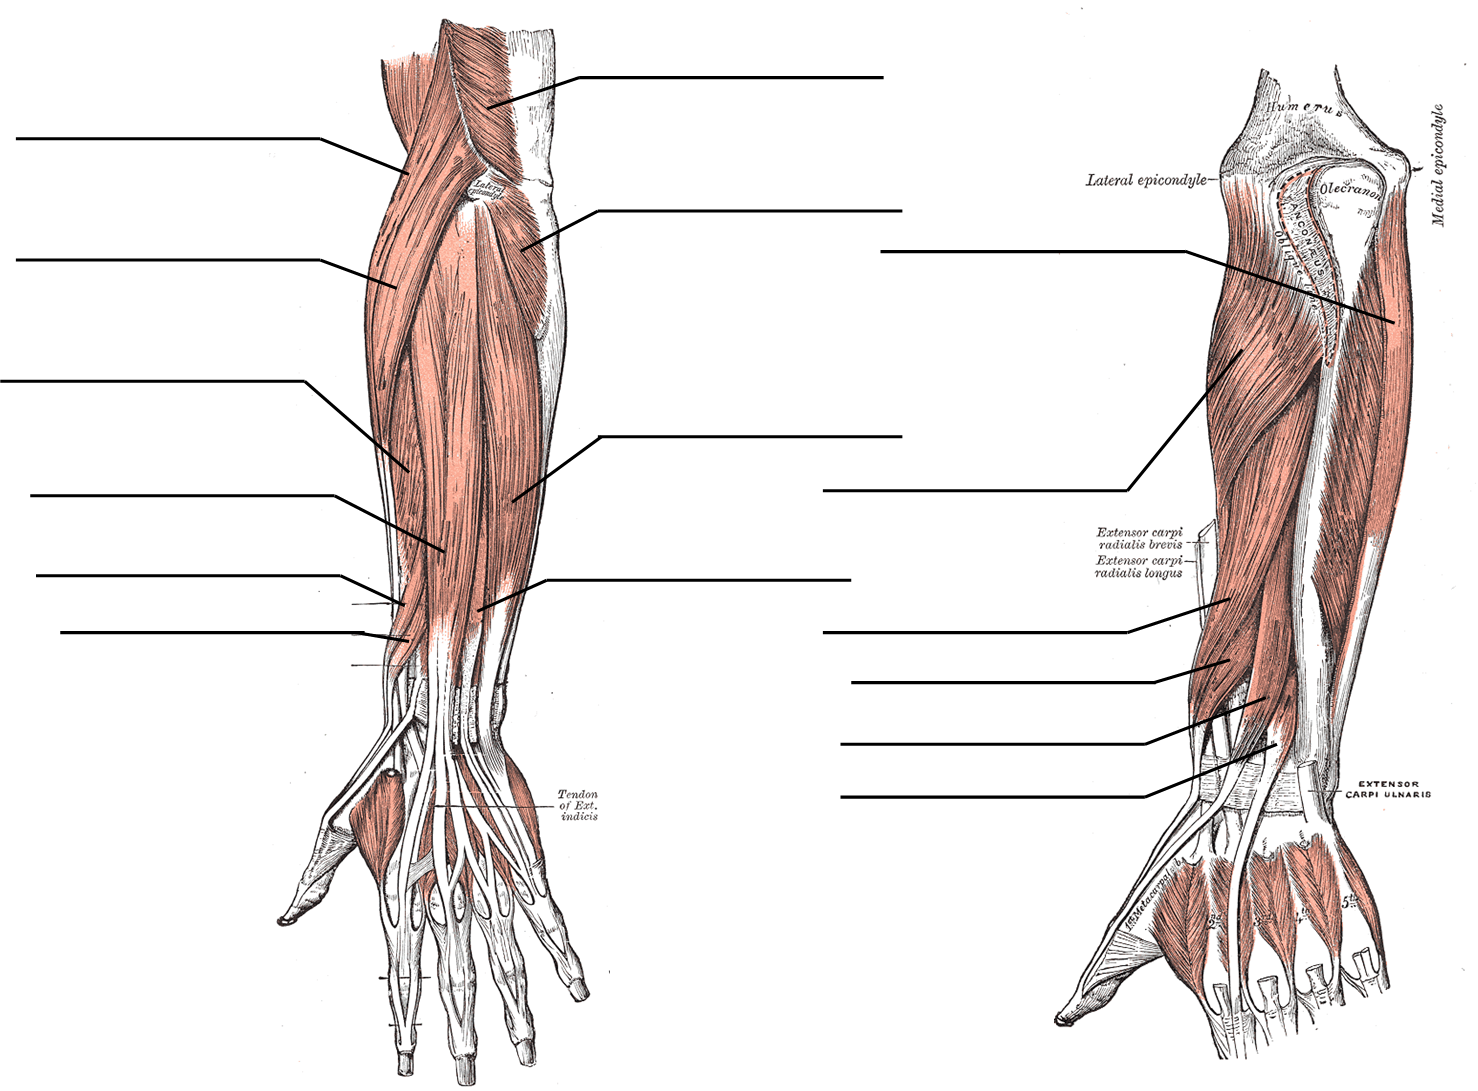 Posterior forearm muscles figure for labeling